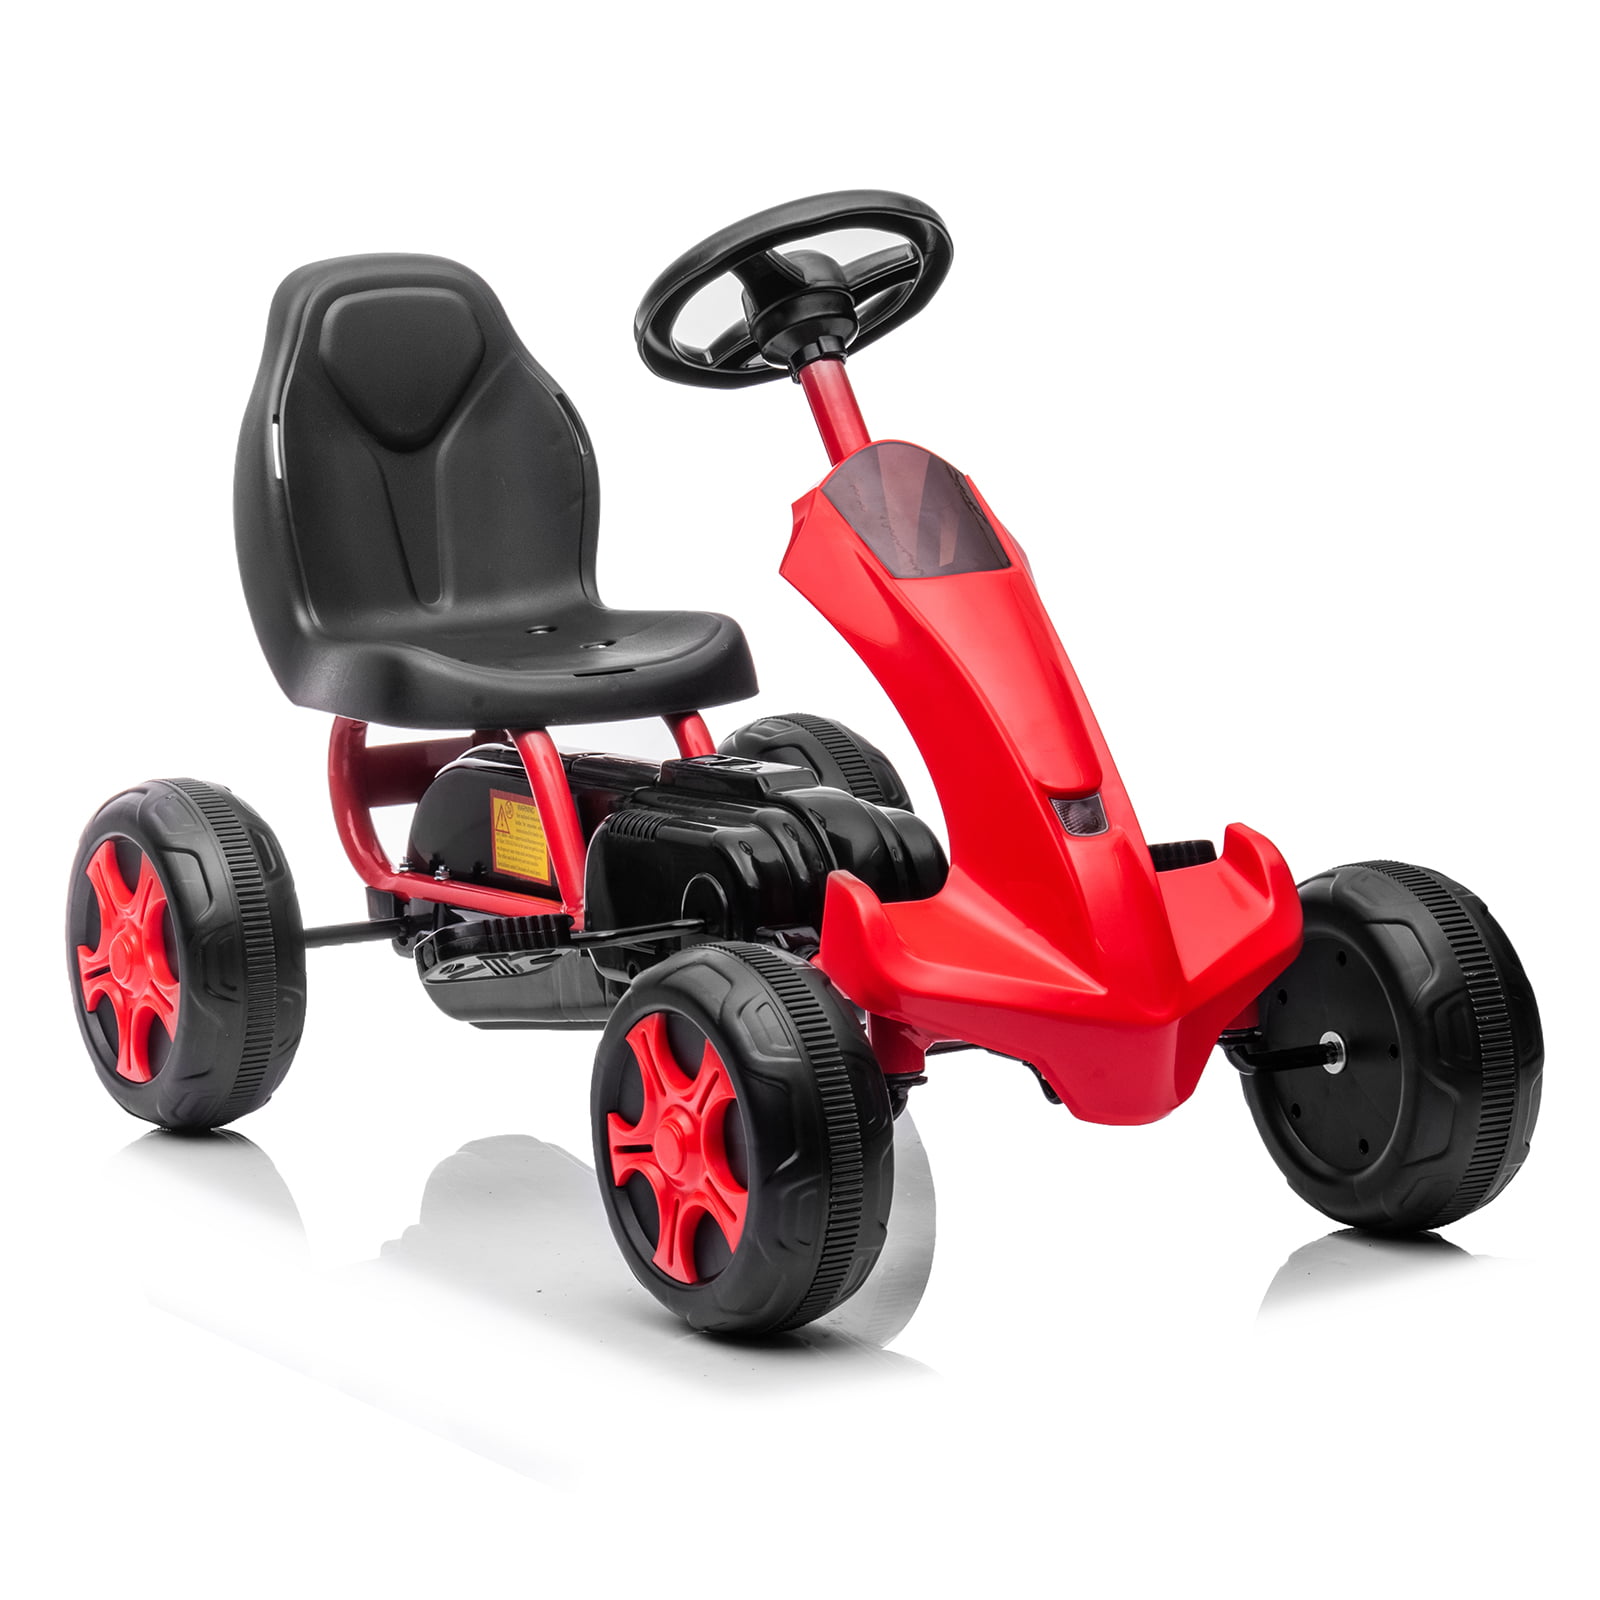 Battery Powered Children Racer 4 Wheel Outdoor Toy Car Ride On Red seat Costzon Kids Electric Go Carts 